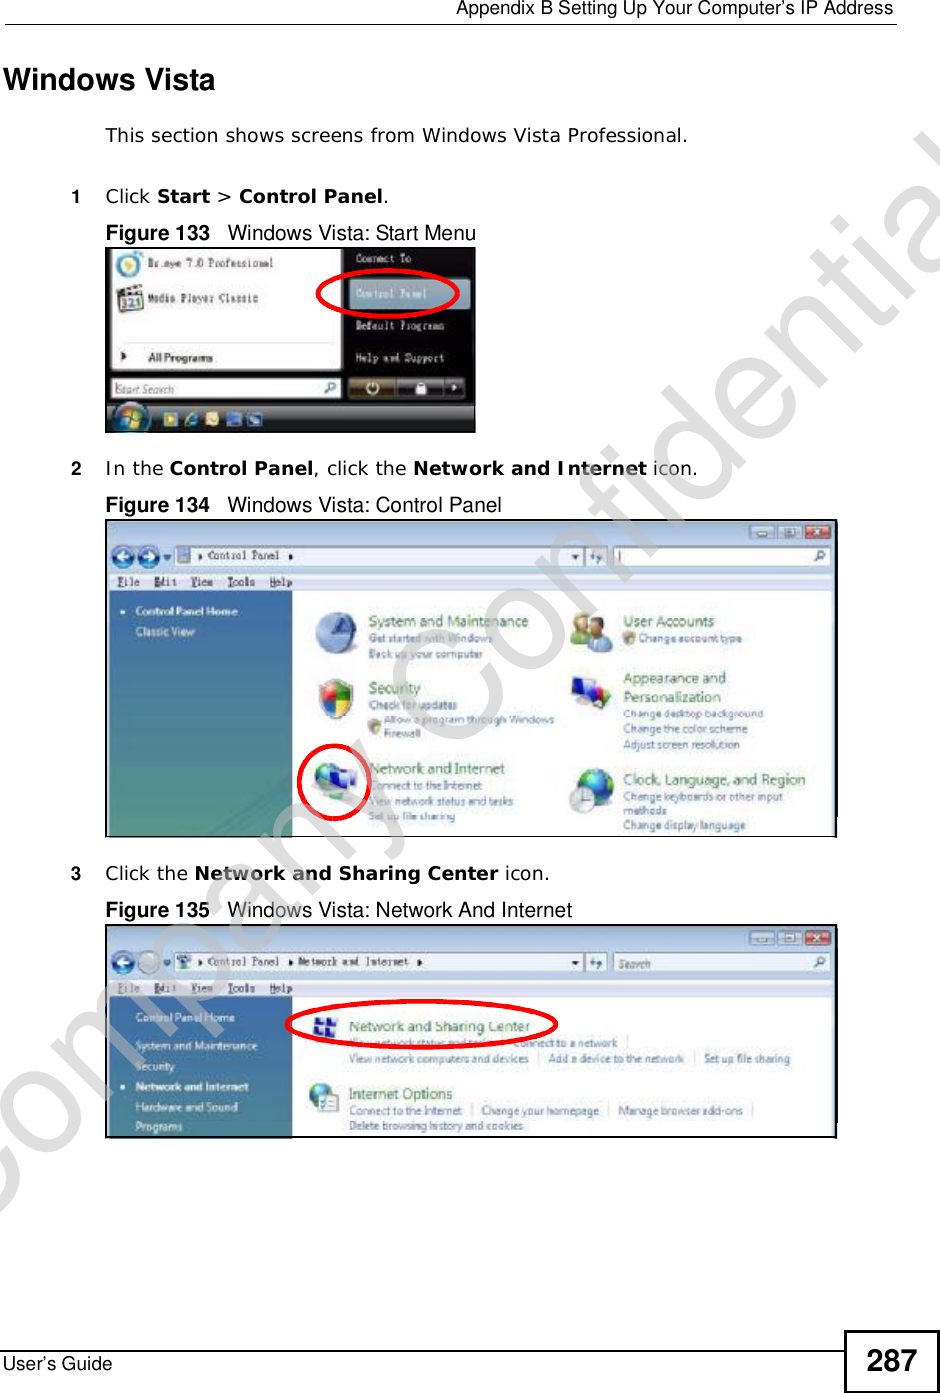  Appendix BSetting Up Your Computer’s IP AddressUser’s Guide 287Windows VistaThis section shows screens from Windows Vista Professional.1Click Start &gt; Control Panel.Figure 133   Windows Vista: Start Menu2In the Control Panel, click the Network and Internet icon.Figure 134   Windows Vista: Control Panel3Click the Network and Sharing Center icon.Figure 135   Windows Vista: Network And InternetCompany Confidential